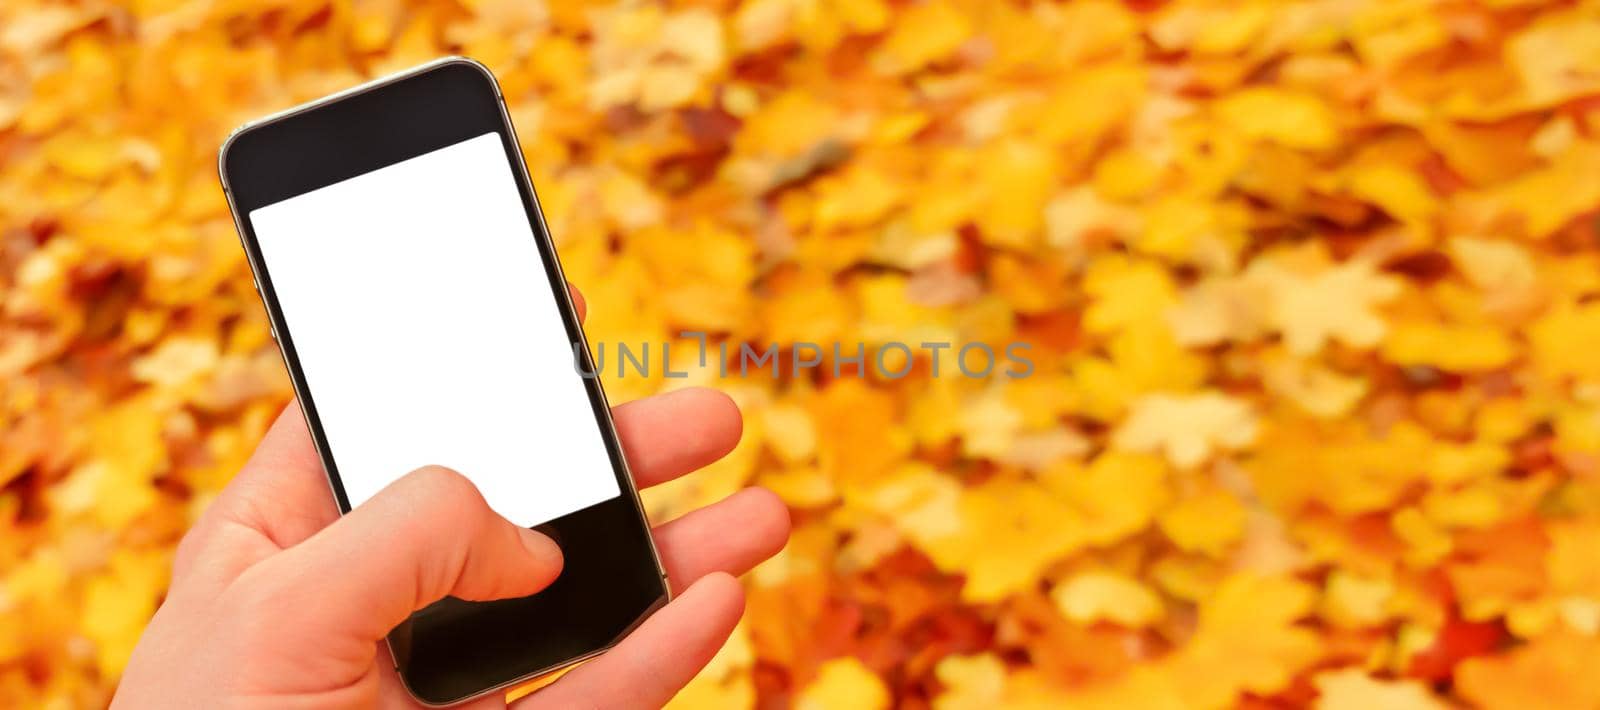 Blank mobile mockup smartphone blank screen hand phone nature autumn banner. Fallen leaves autumn mobile phone mockup hand holding smartphone nature fall background leaves falling. Screen mobile hand by synel